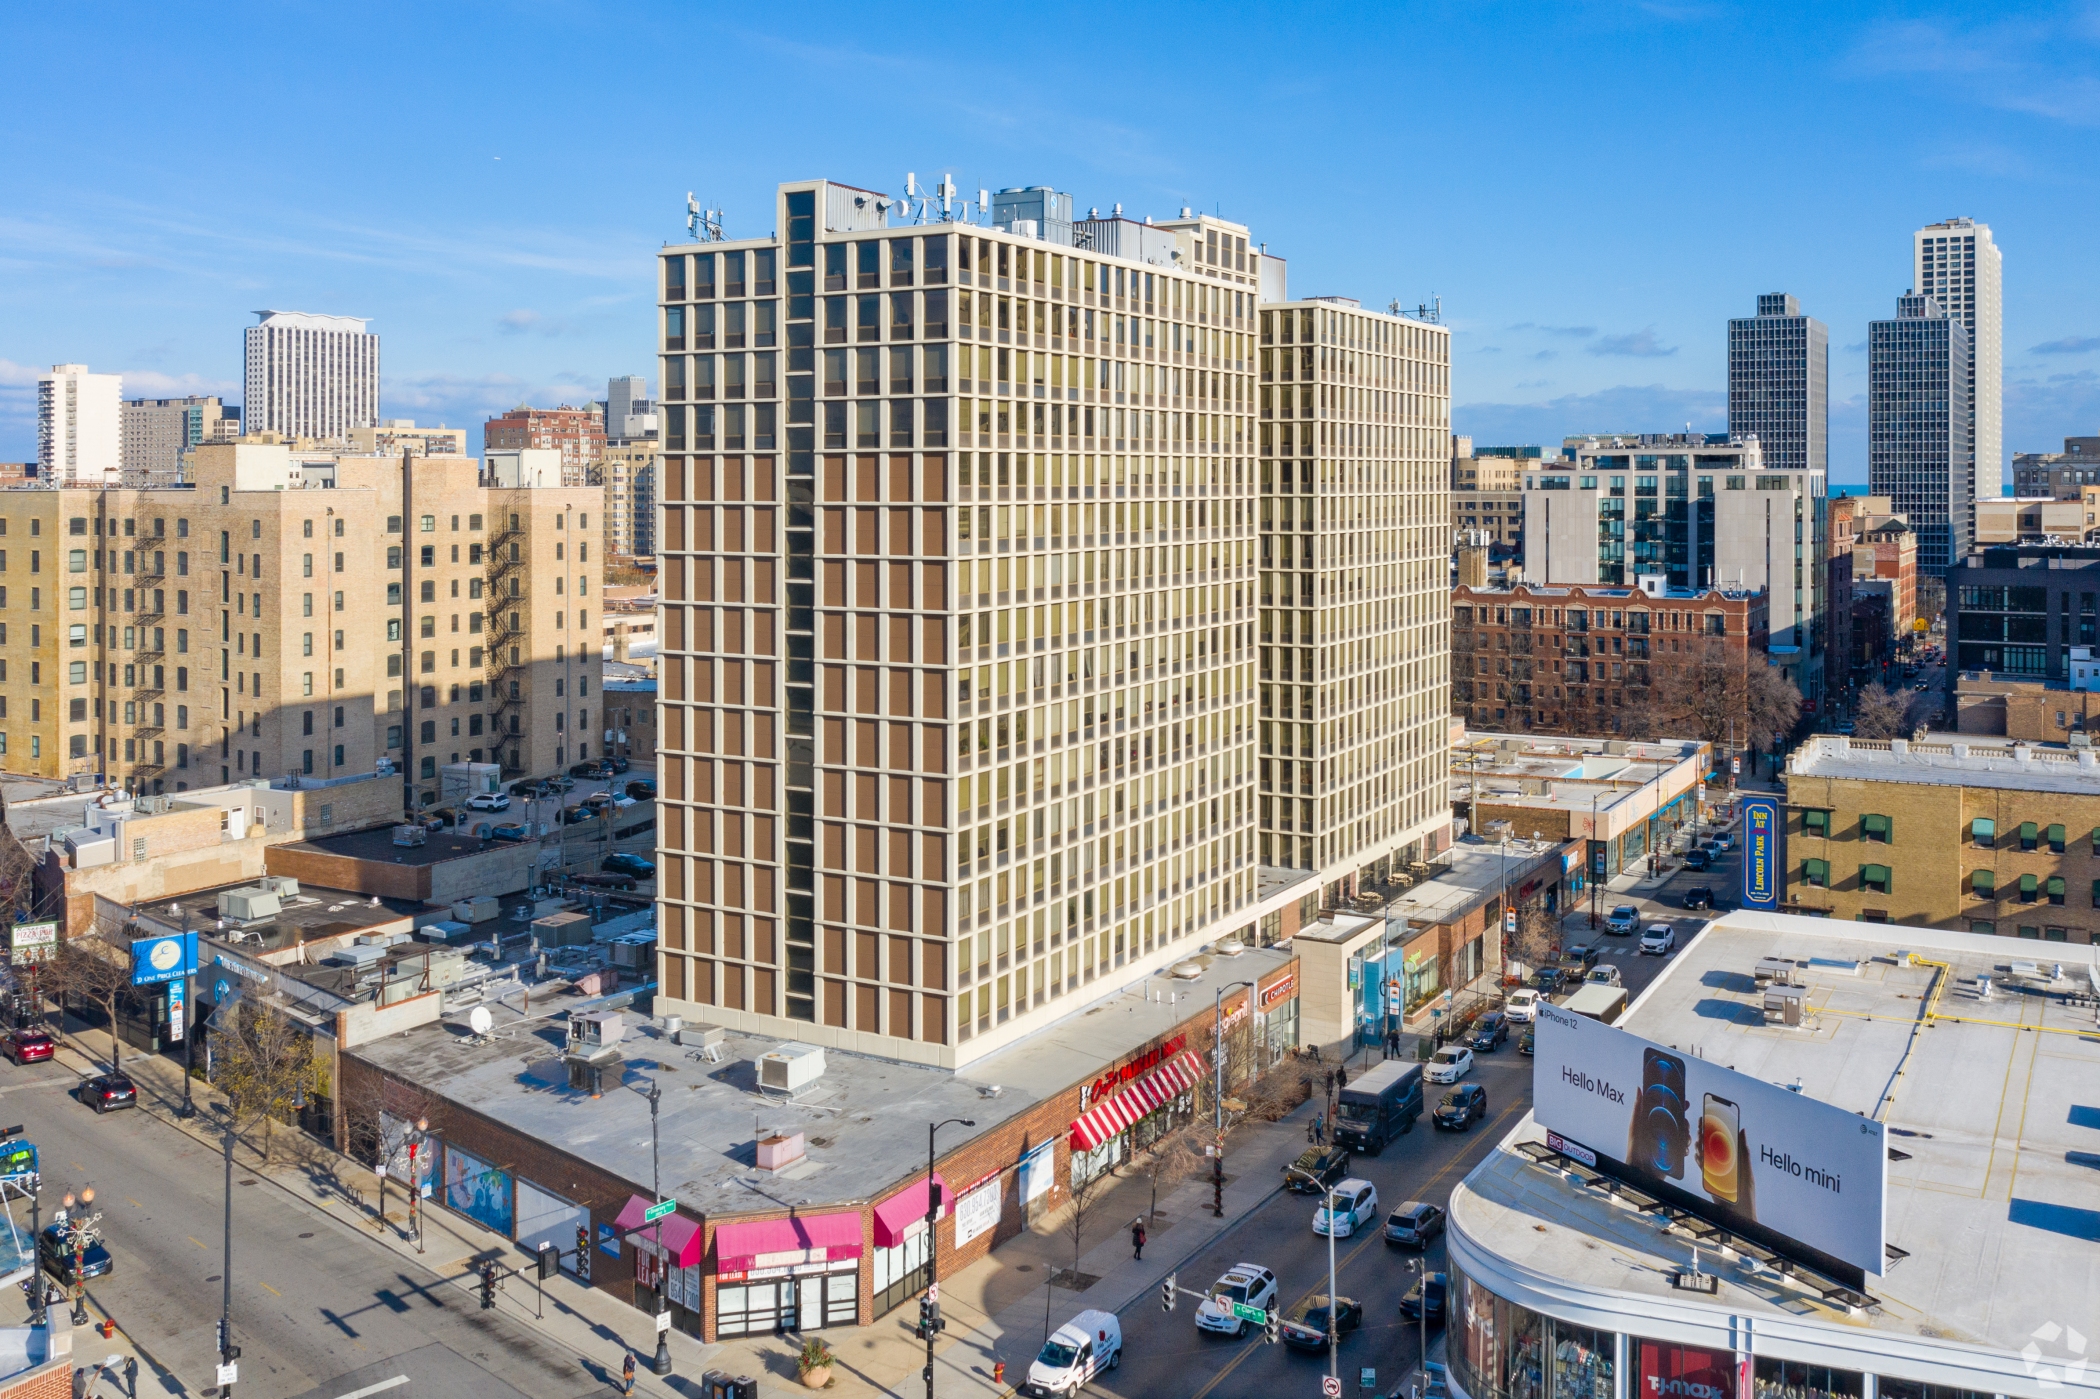 Avanath Capital Management has paid $119 million for the 256-unit Lincoln Park Plaza apartment building at 600 W. Diversey Parkway in Chicago. (Justin Schmidt/CoStar)